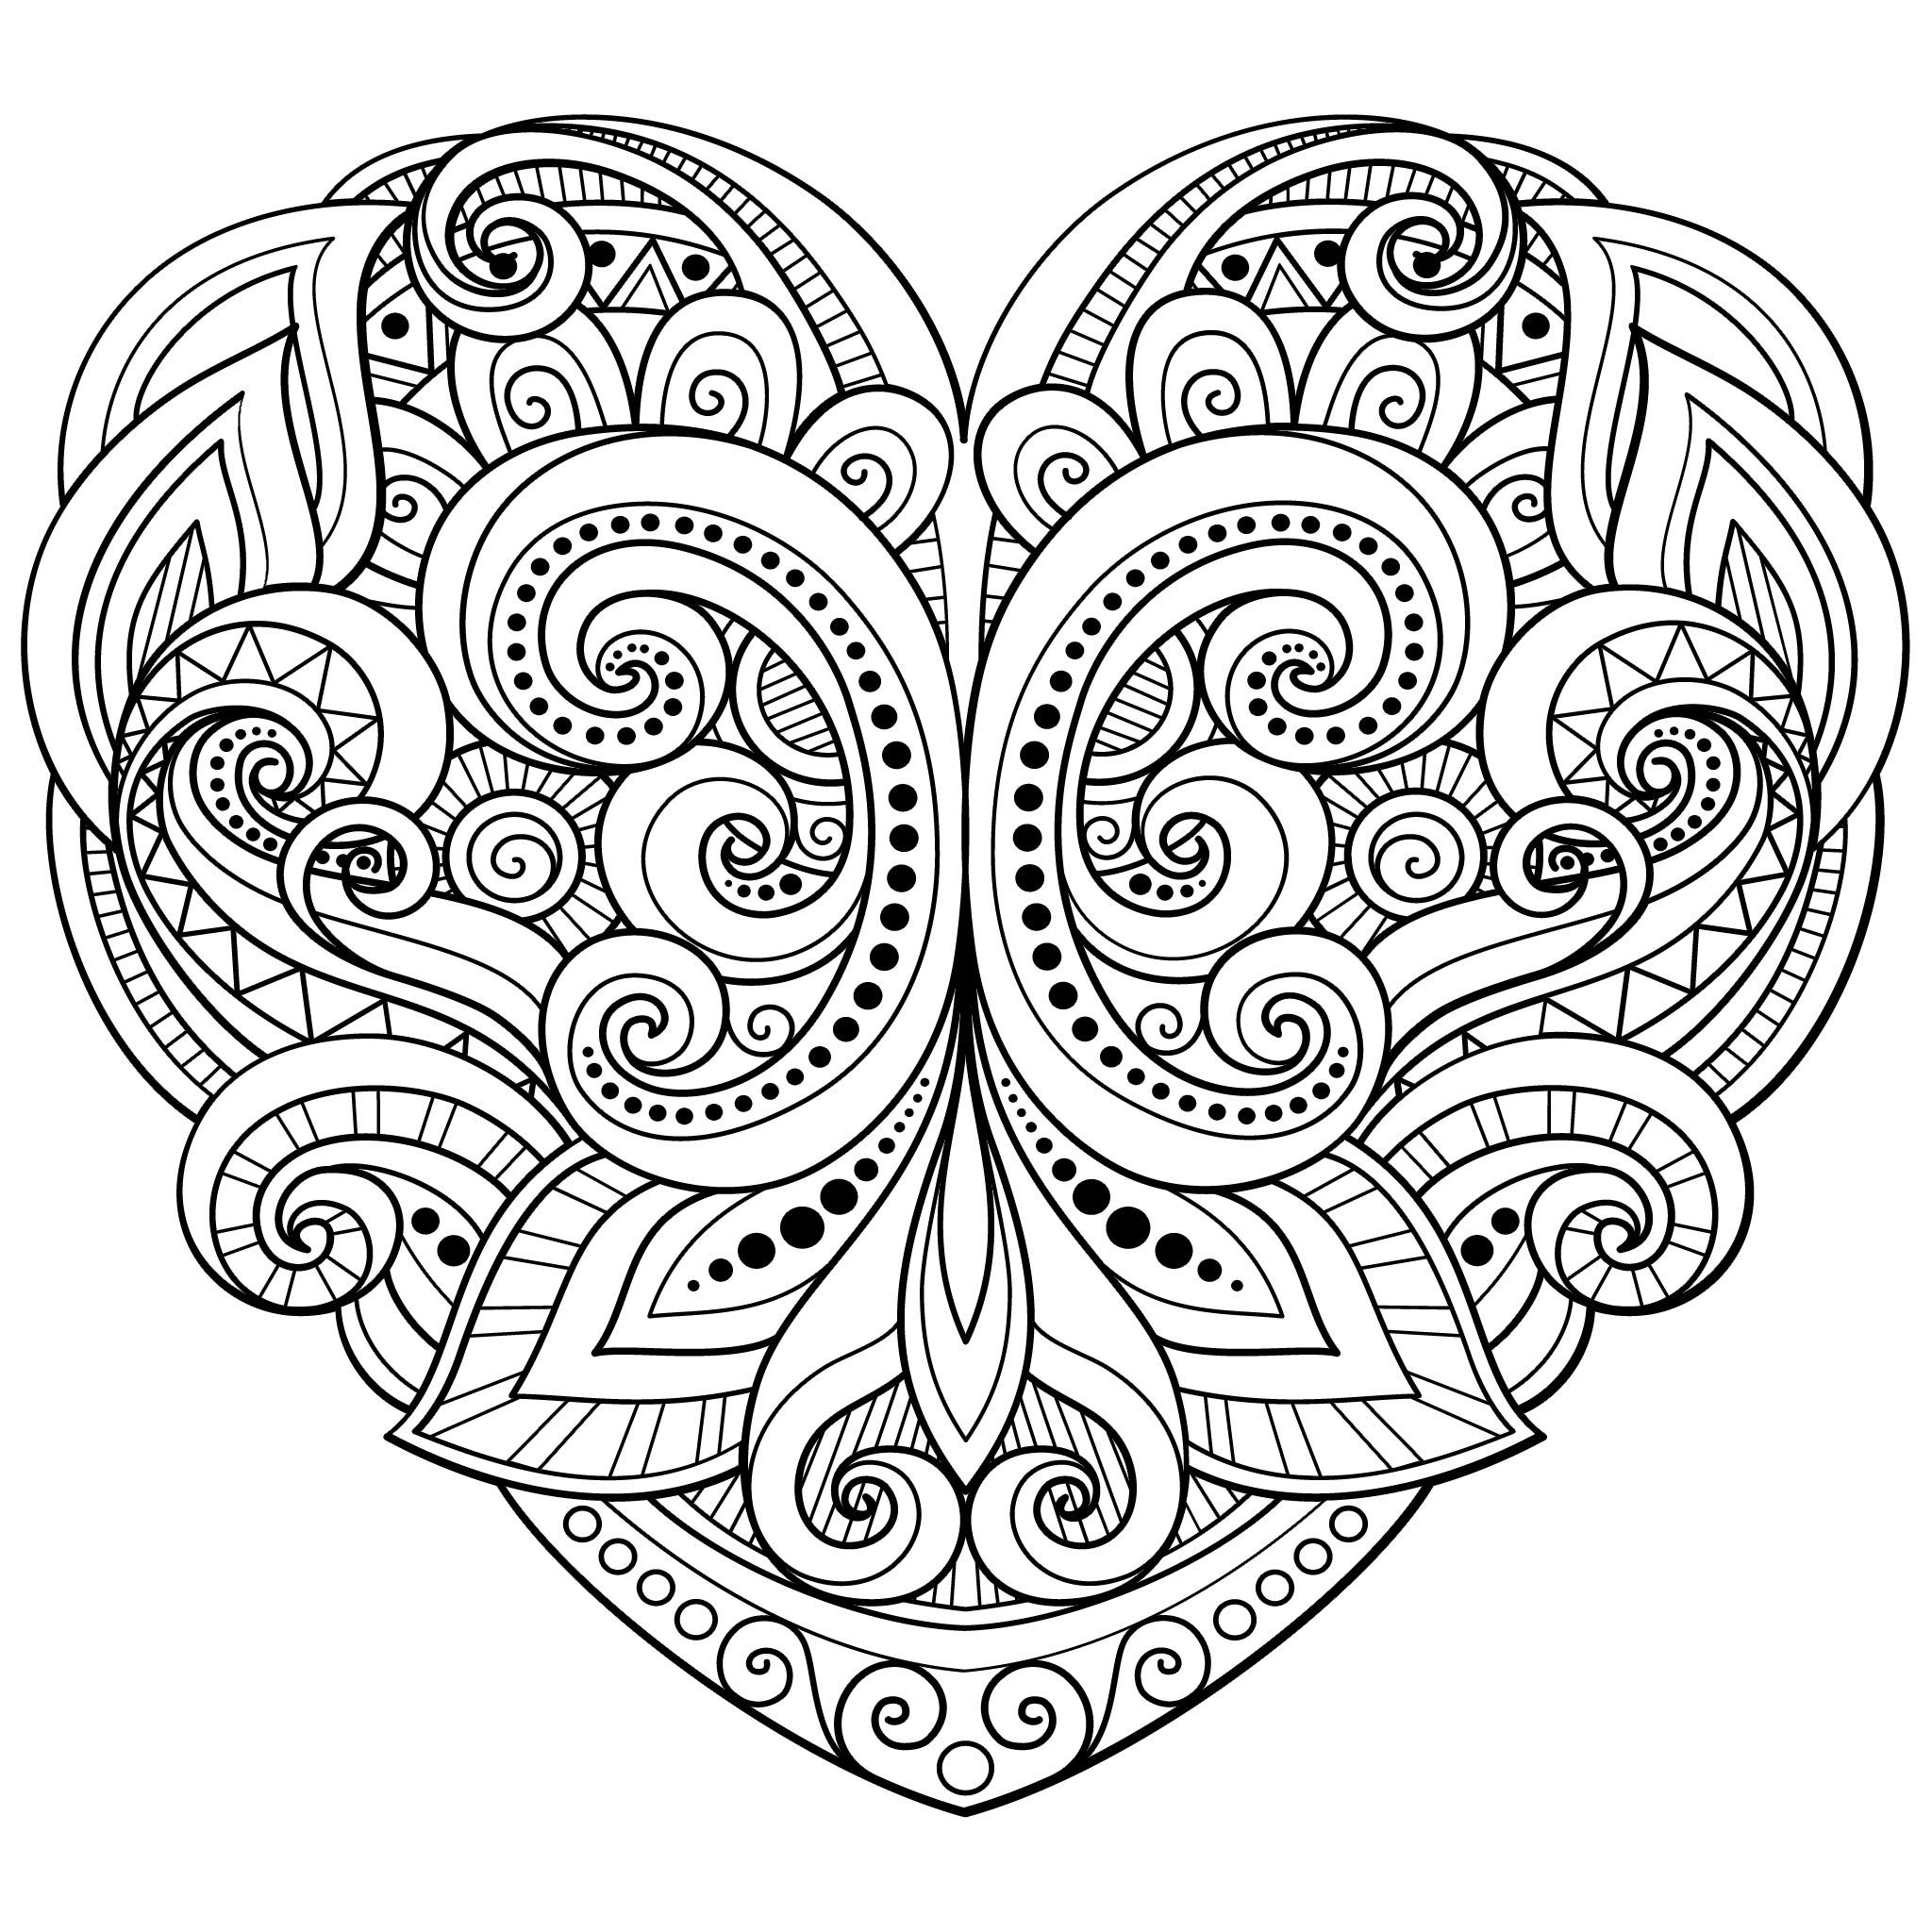 Coloring Pages For Adults Love
 Love heart coloring page